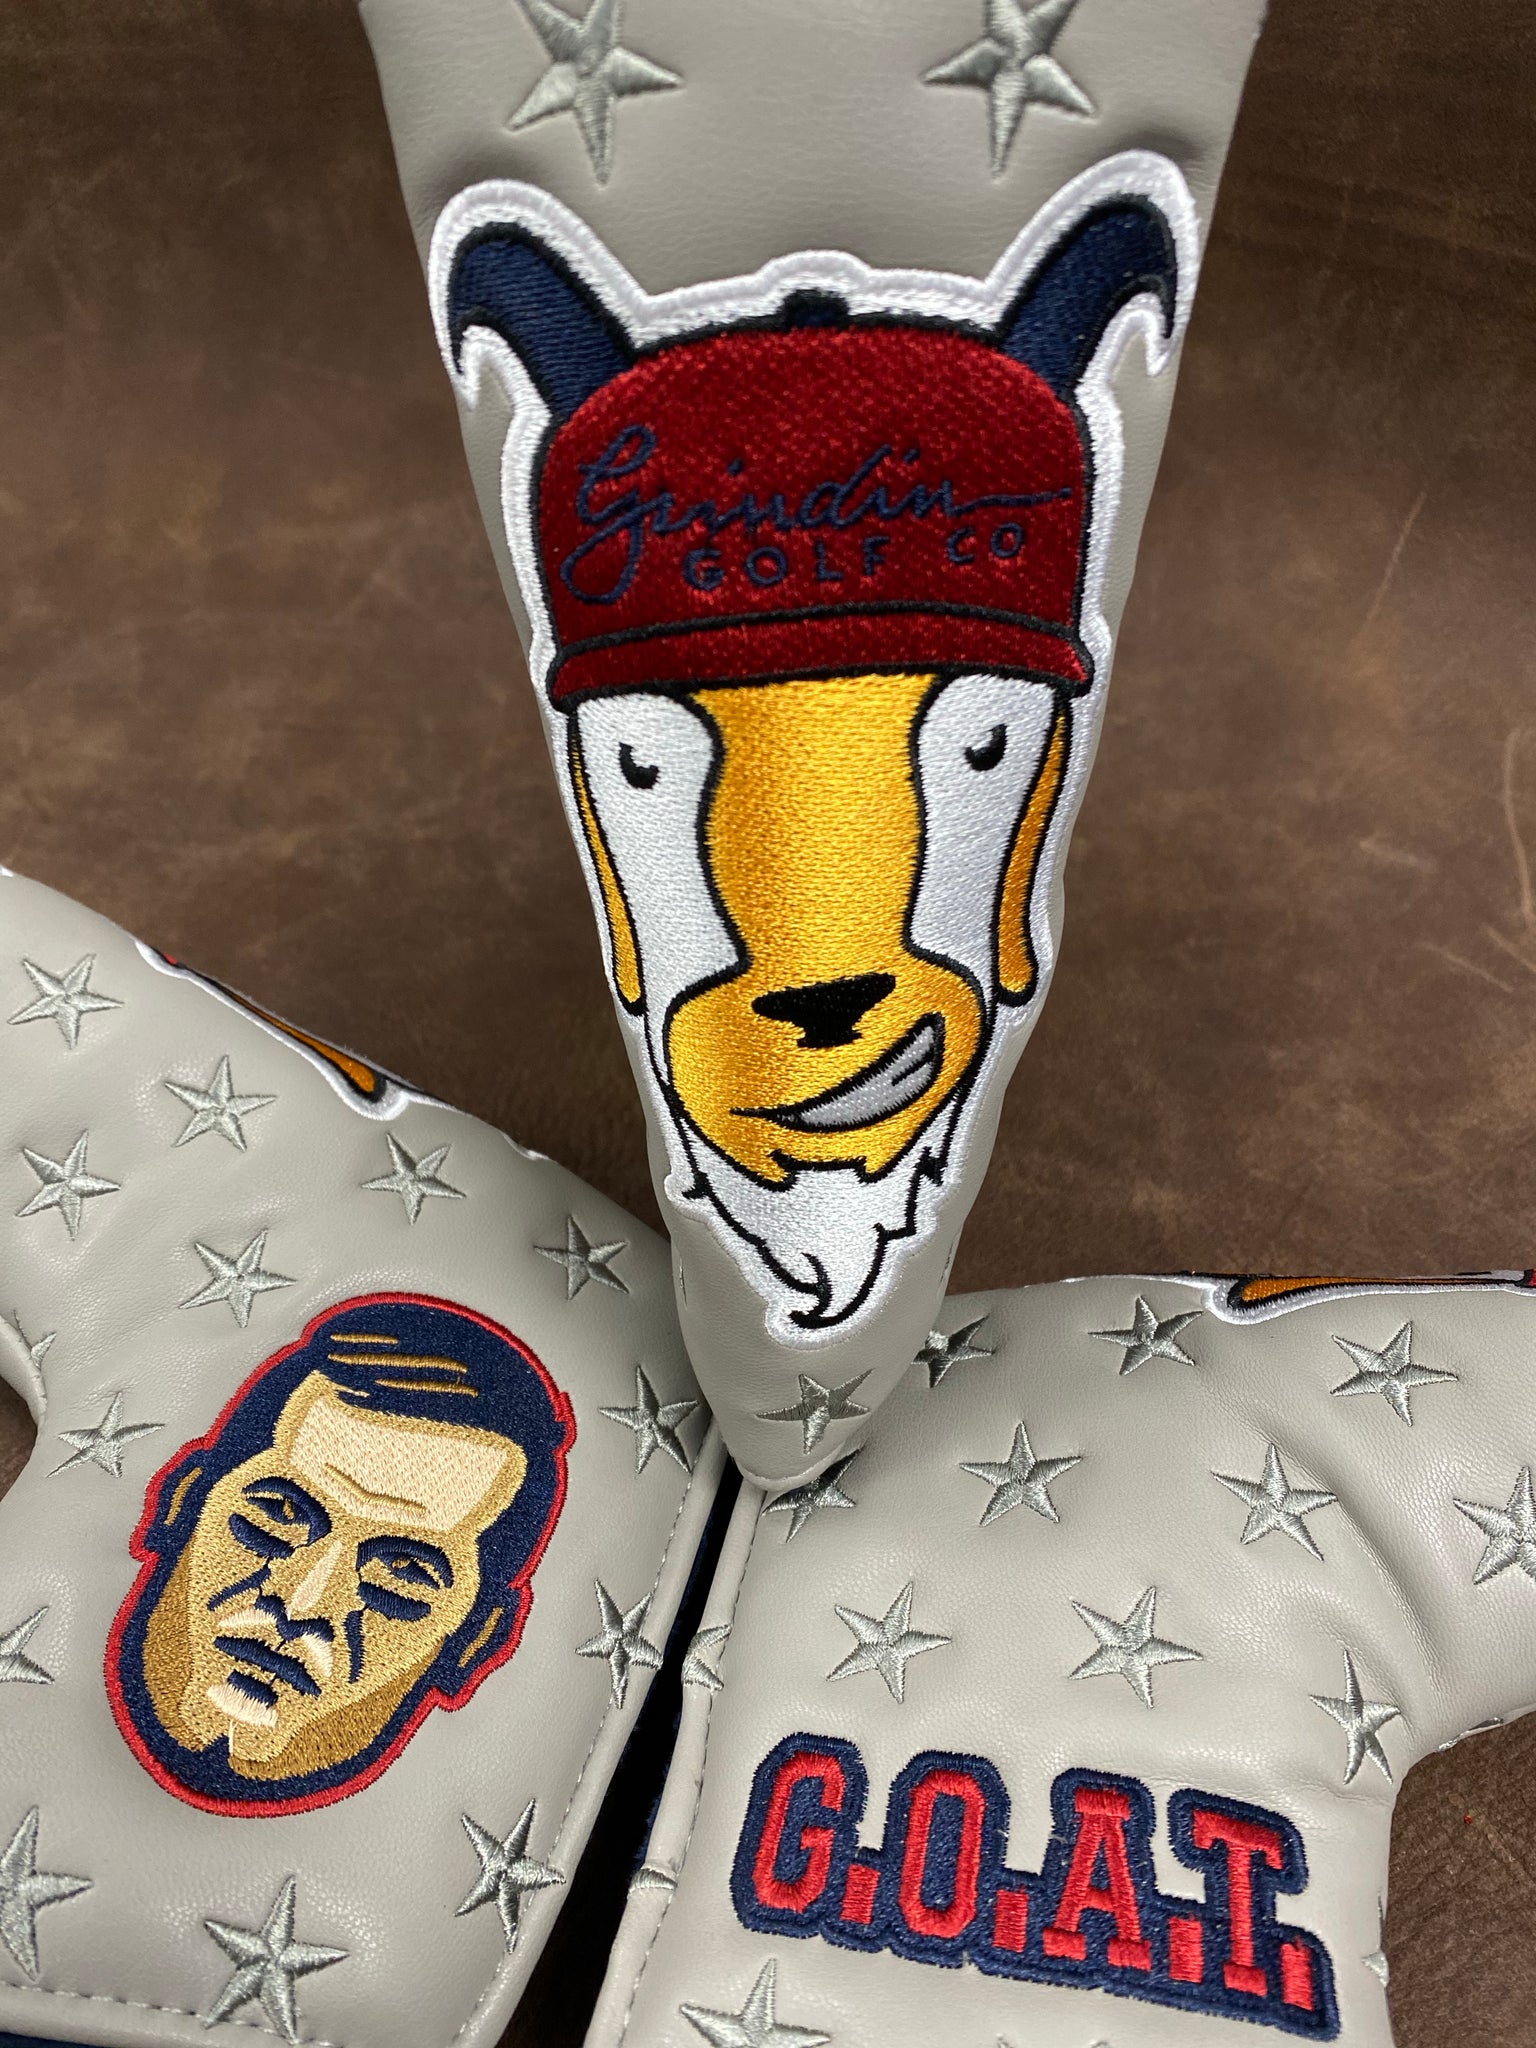 “THE GOAT” Blade Putter Cover